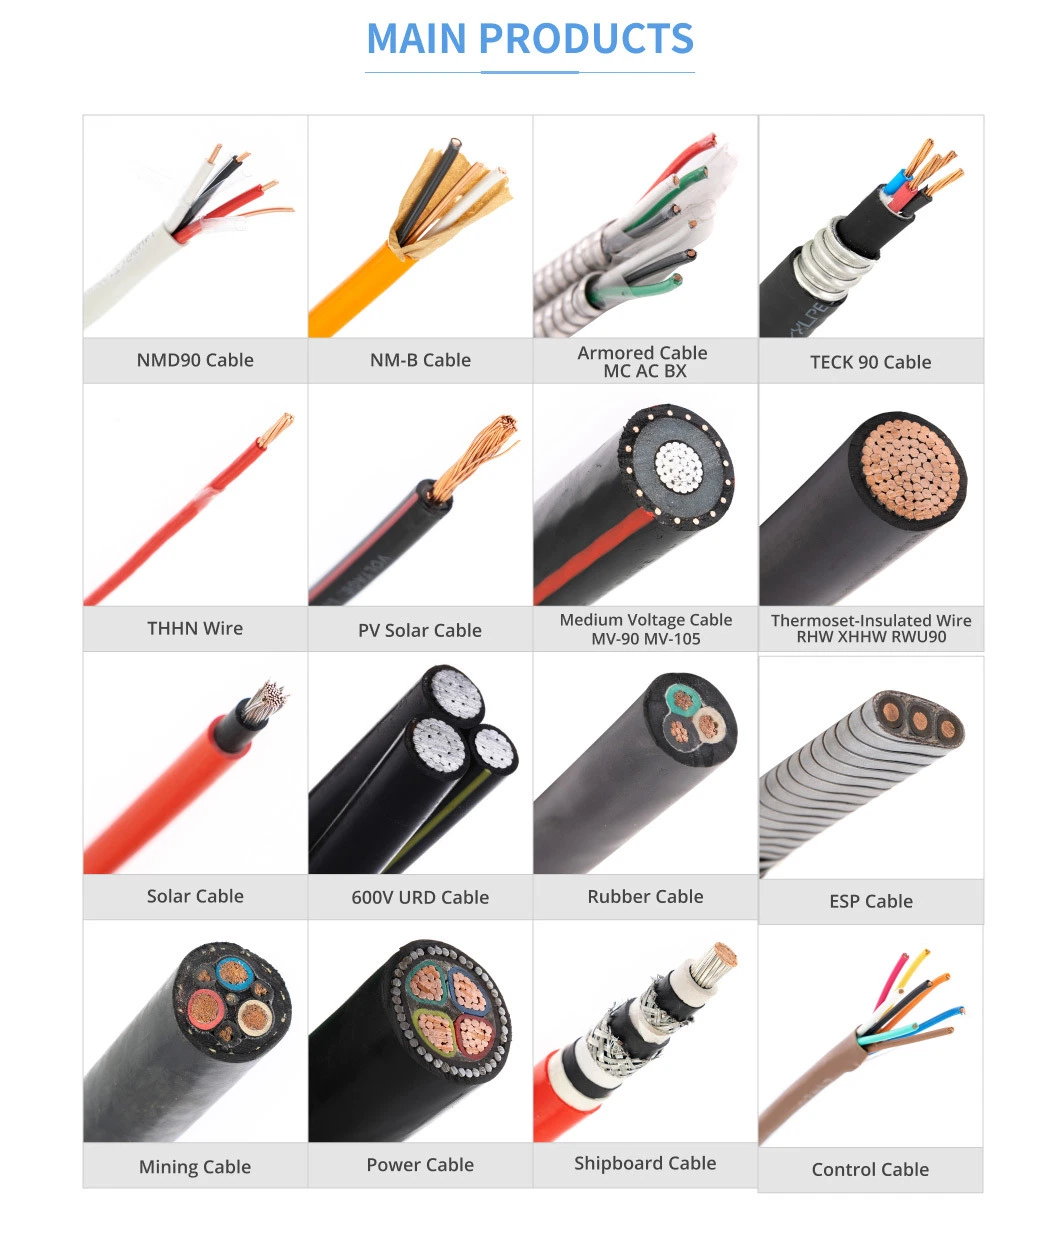 2.5 mm Twin and Earth 10mm Electrical Wire and Cables 1.5 mm PVC Insulation 4mm Flat TPS Thermoplastic-Sheathed 3 Core 6mm 16mm Active Circular